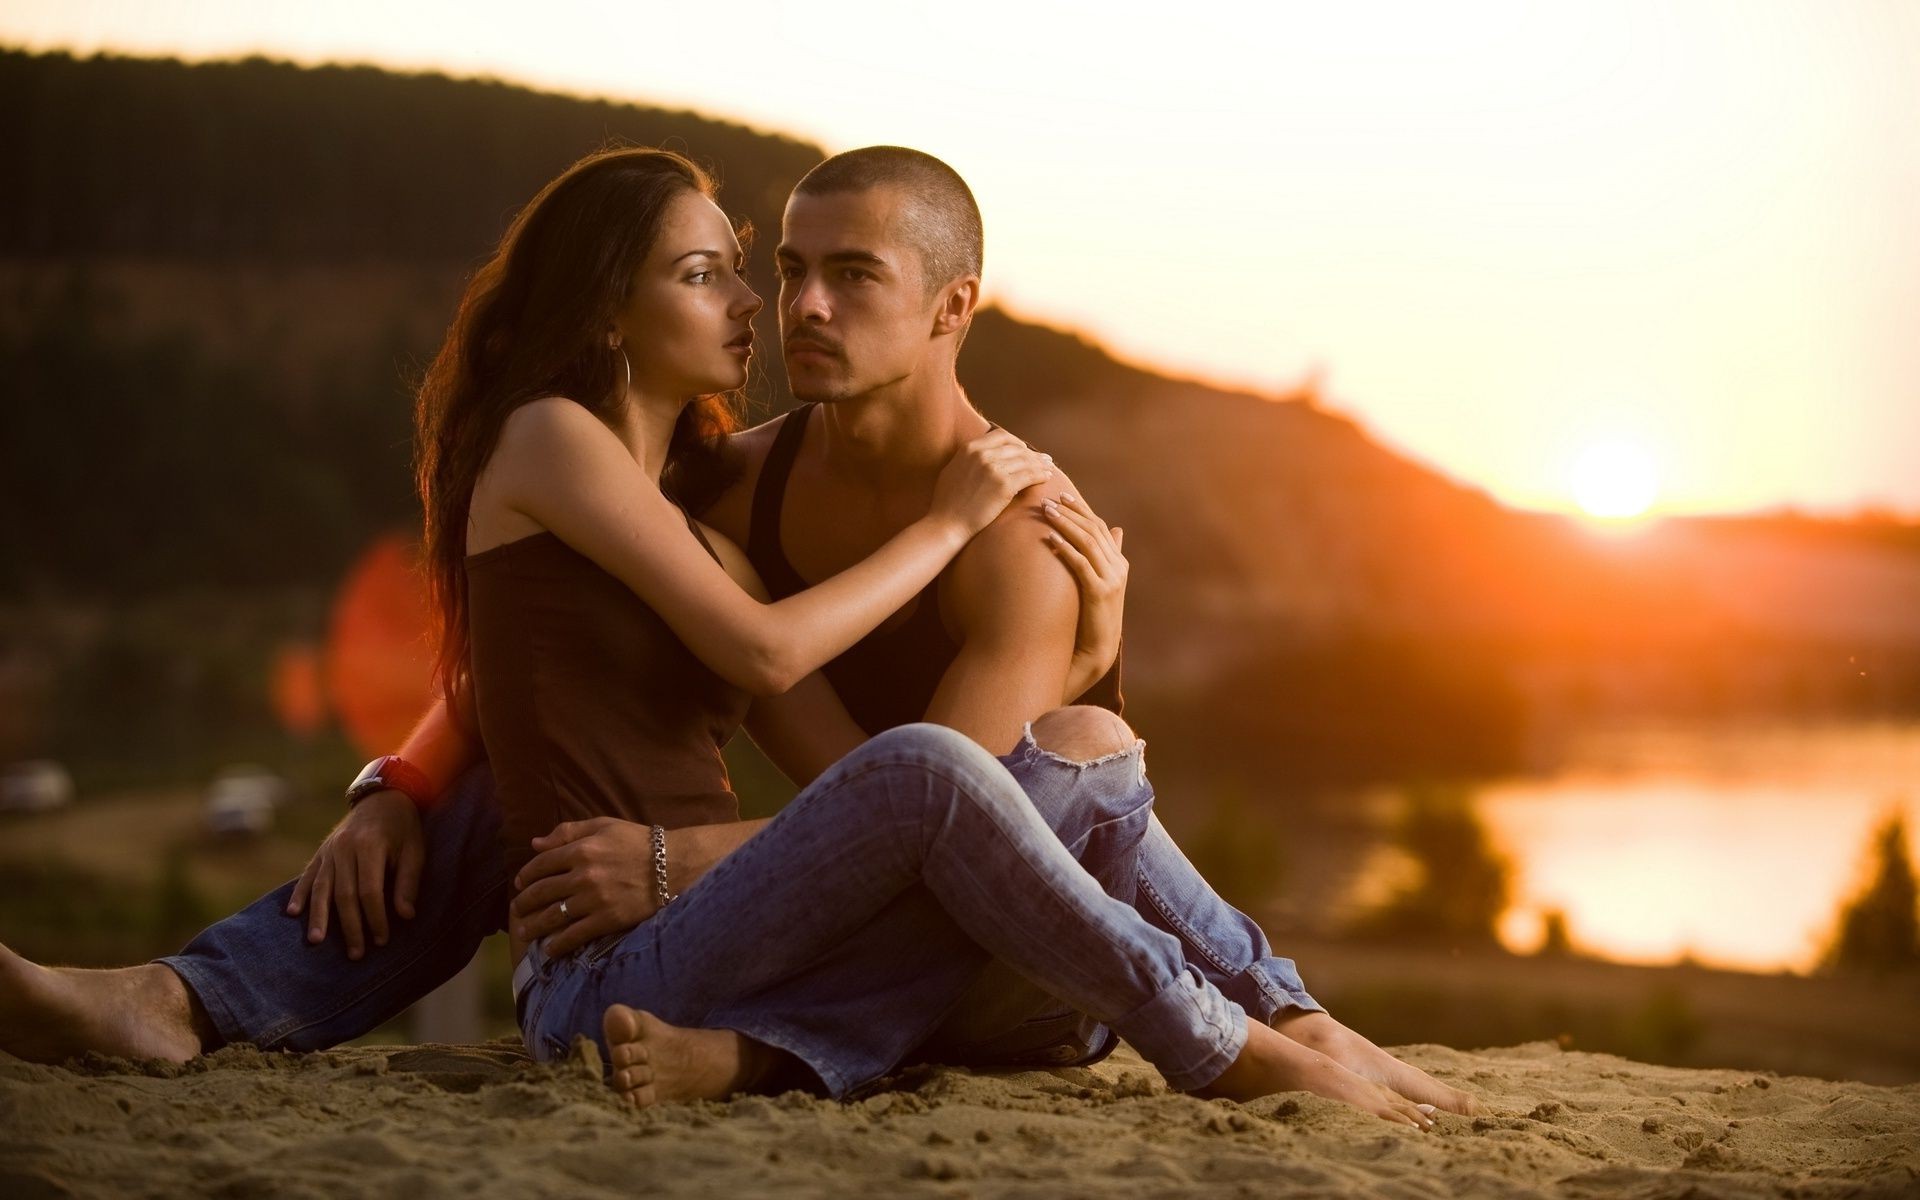 couples adult two woman man outdoors beach recreation travel girl love sunset one water wear sand affection seashore leisure facial expression